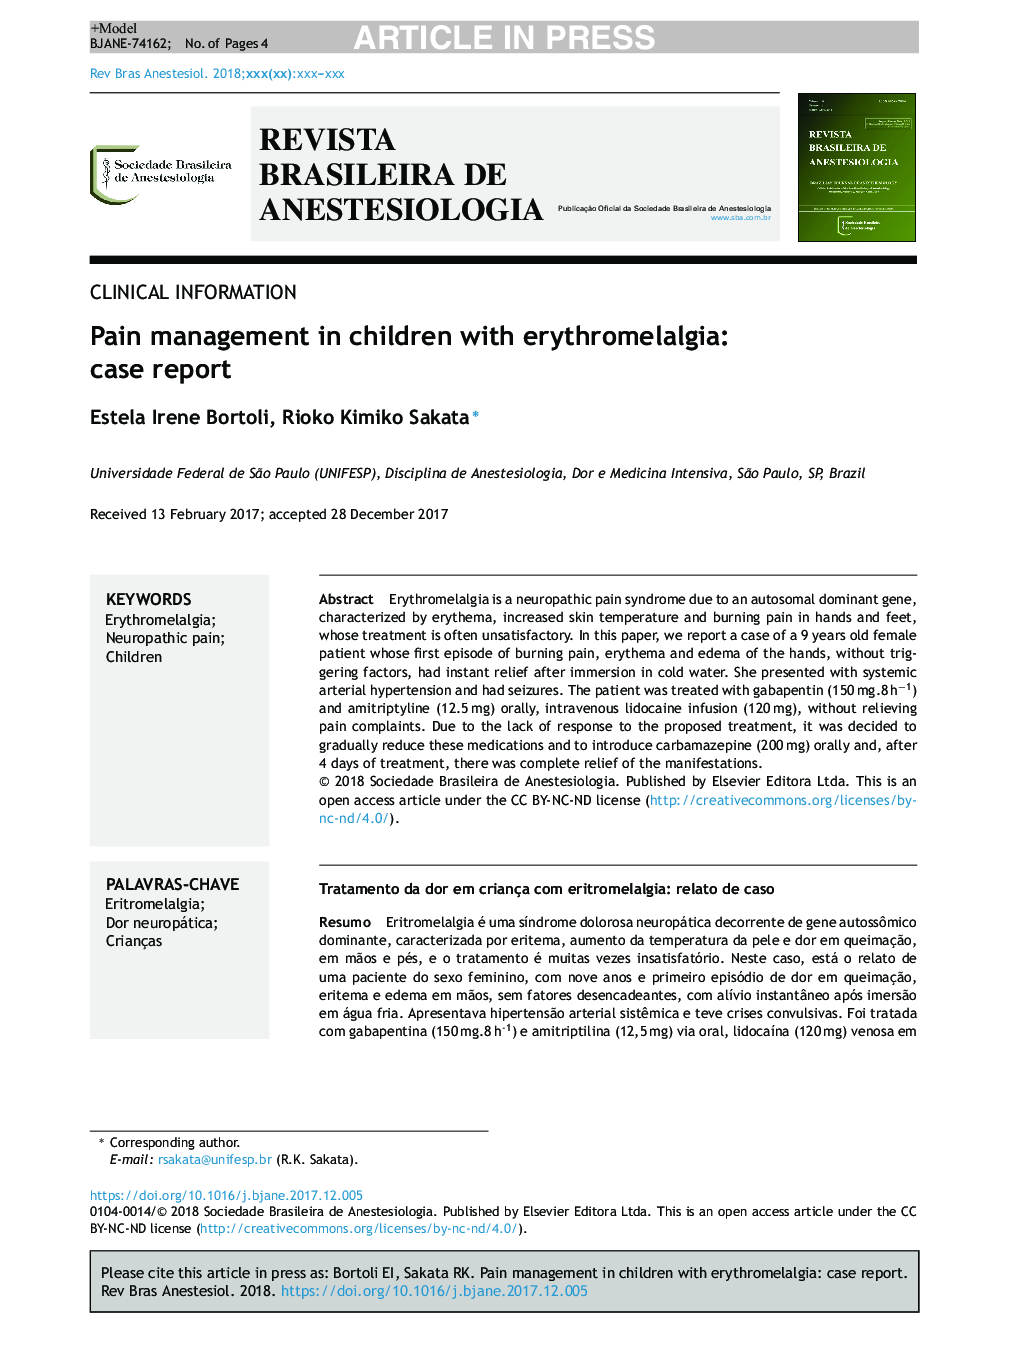 Pain management in children with erythromelalgia: case report